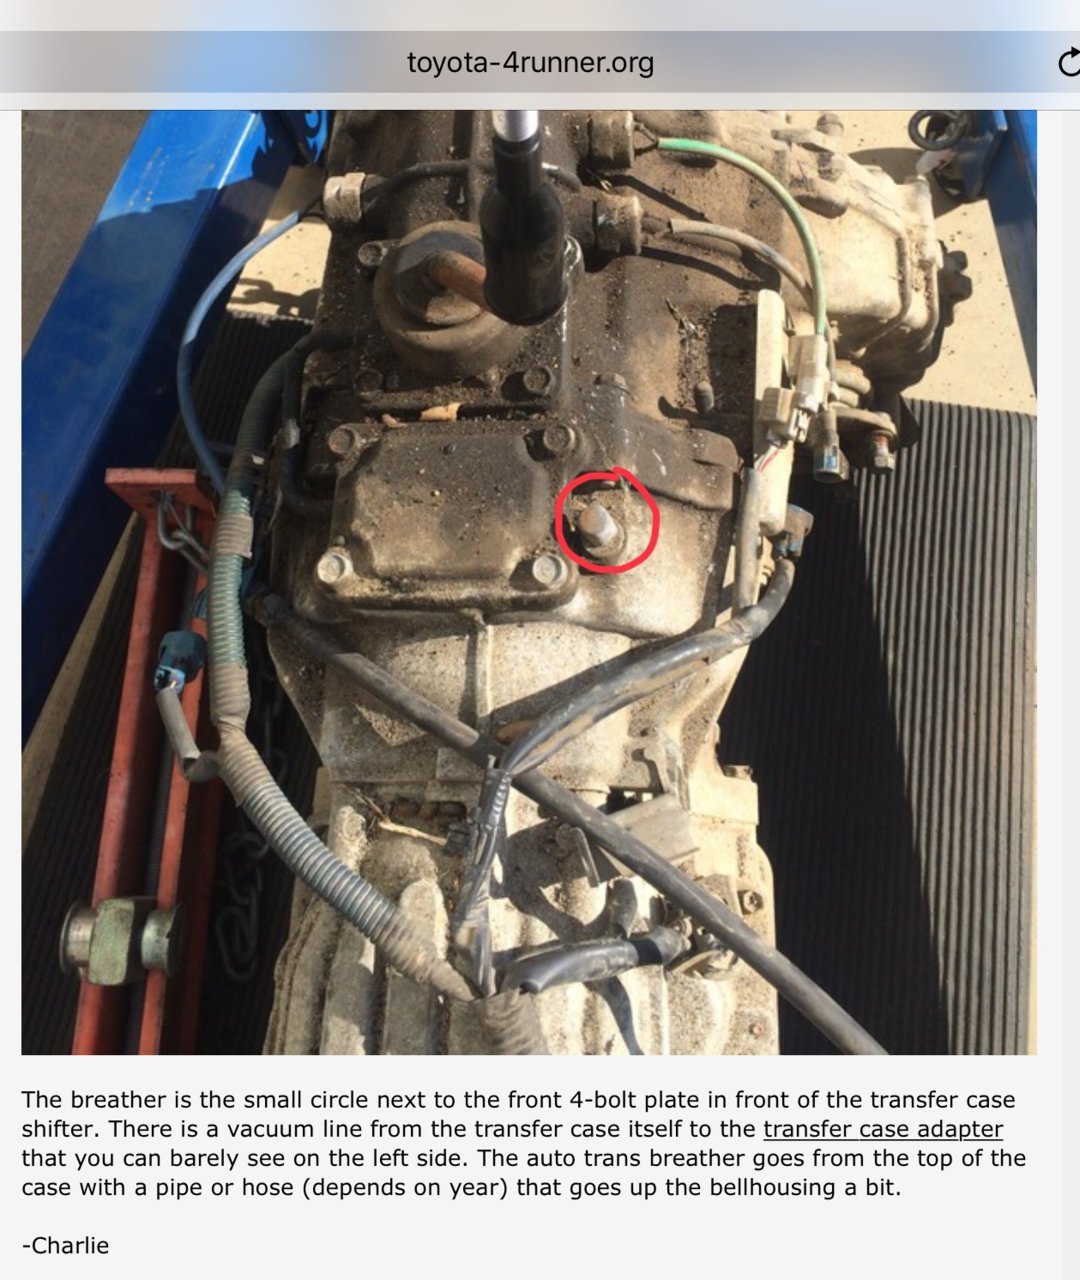 Ventilation valves - More than expected! | Toyota Tundra Forum